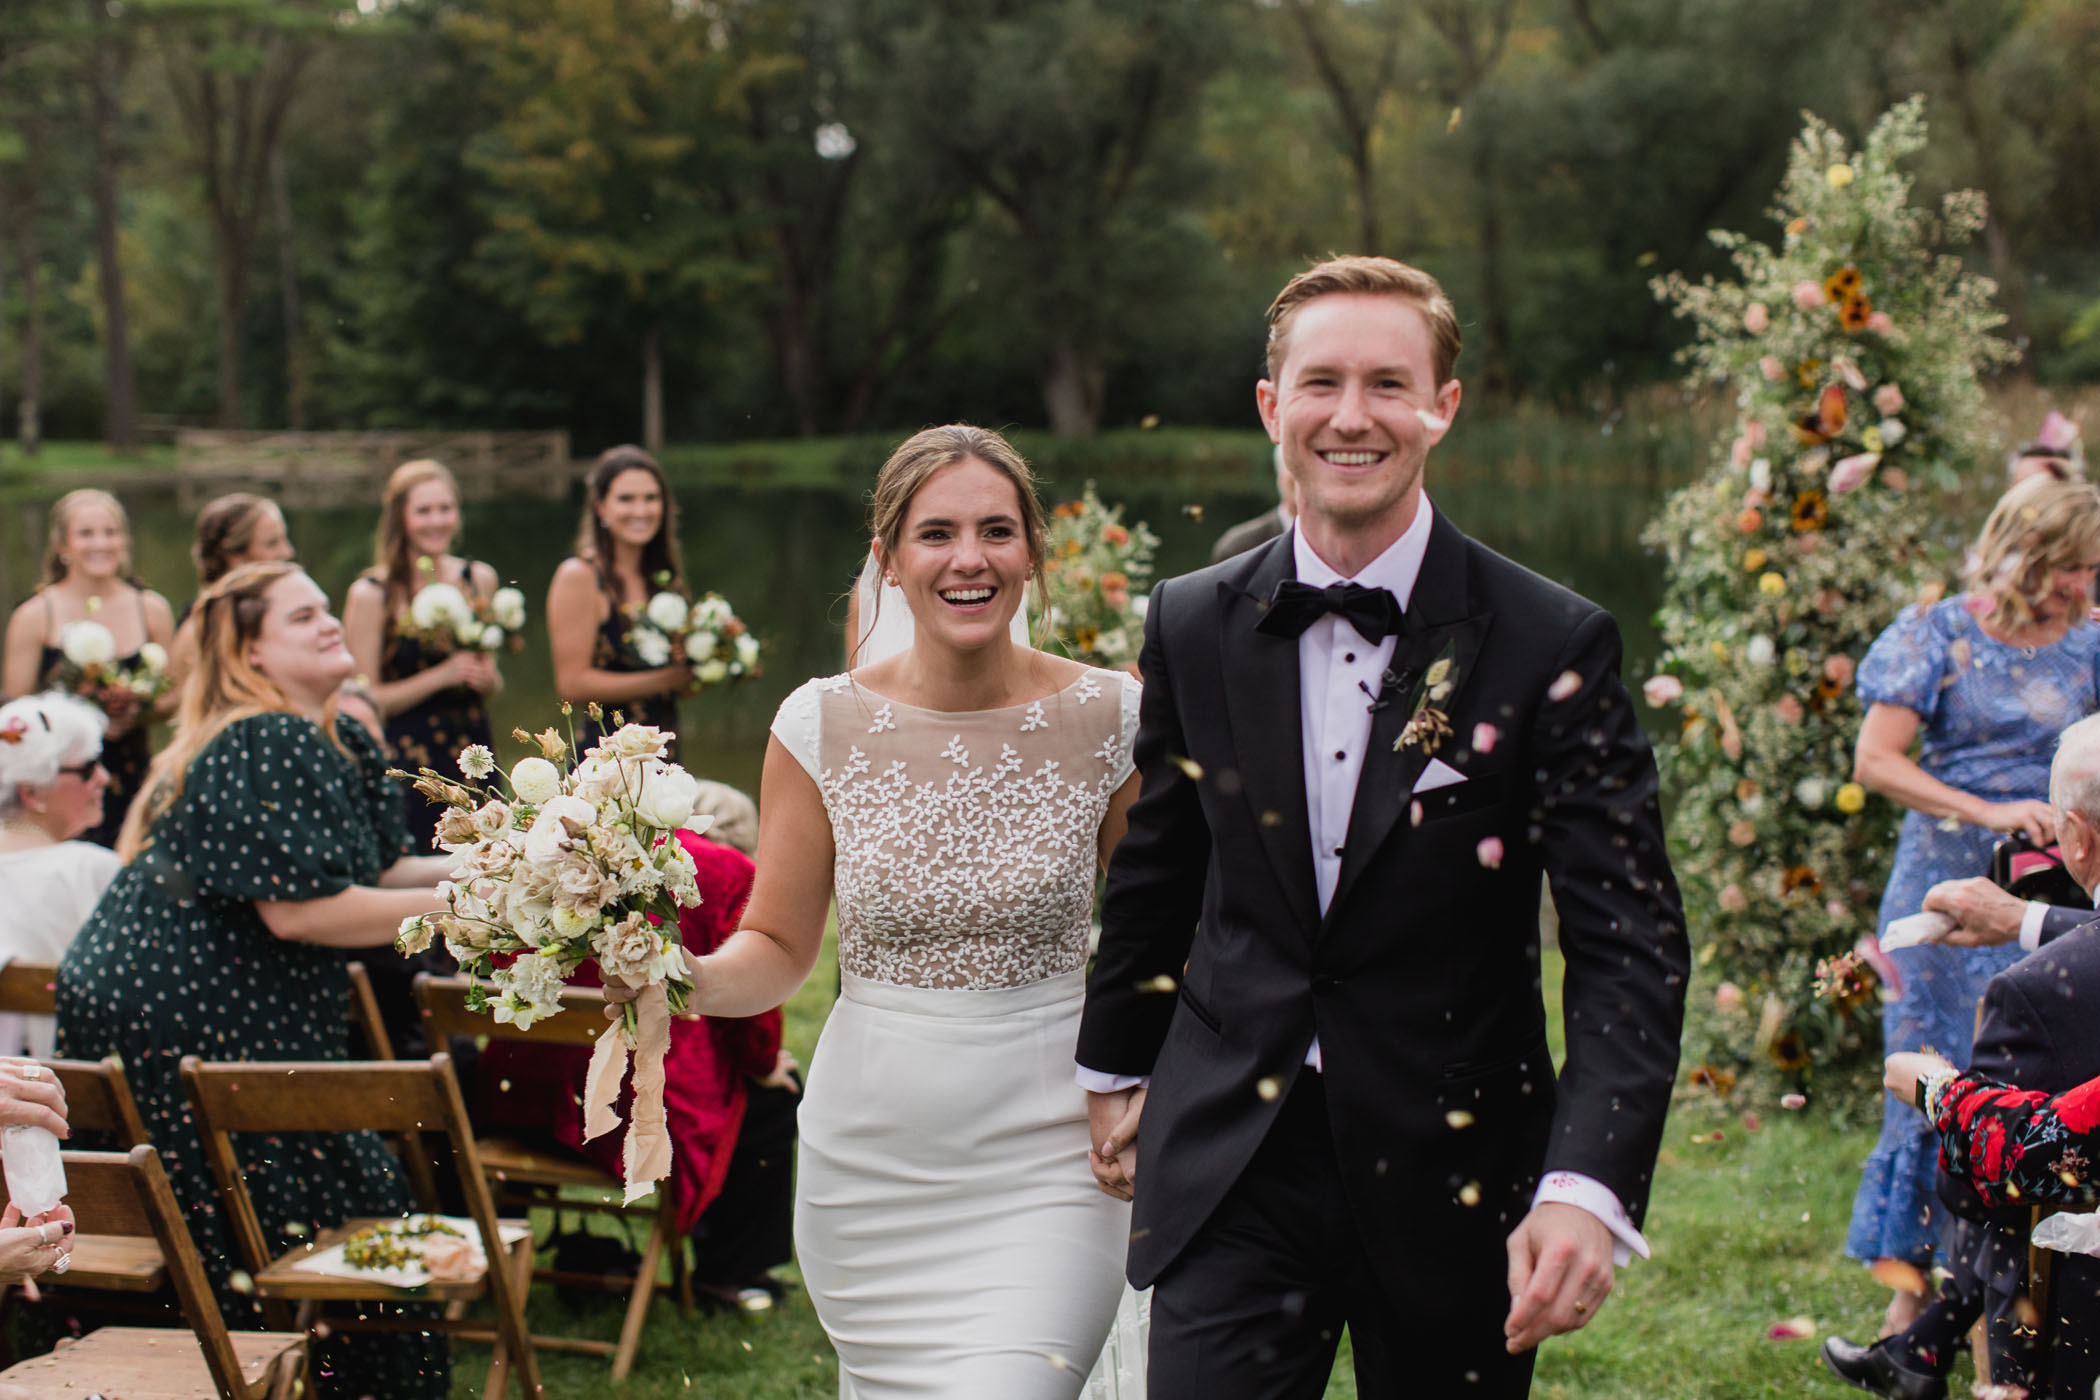 Modern Romance and Cottagecore Vibes for this Vermont Wedding